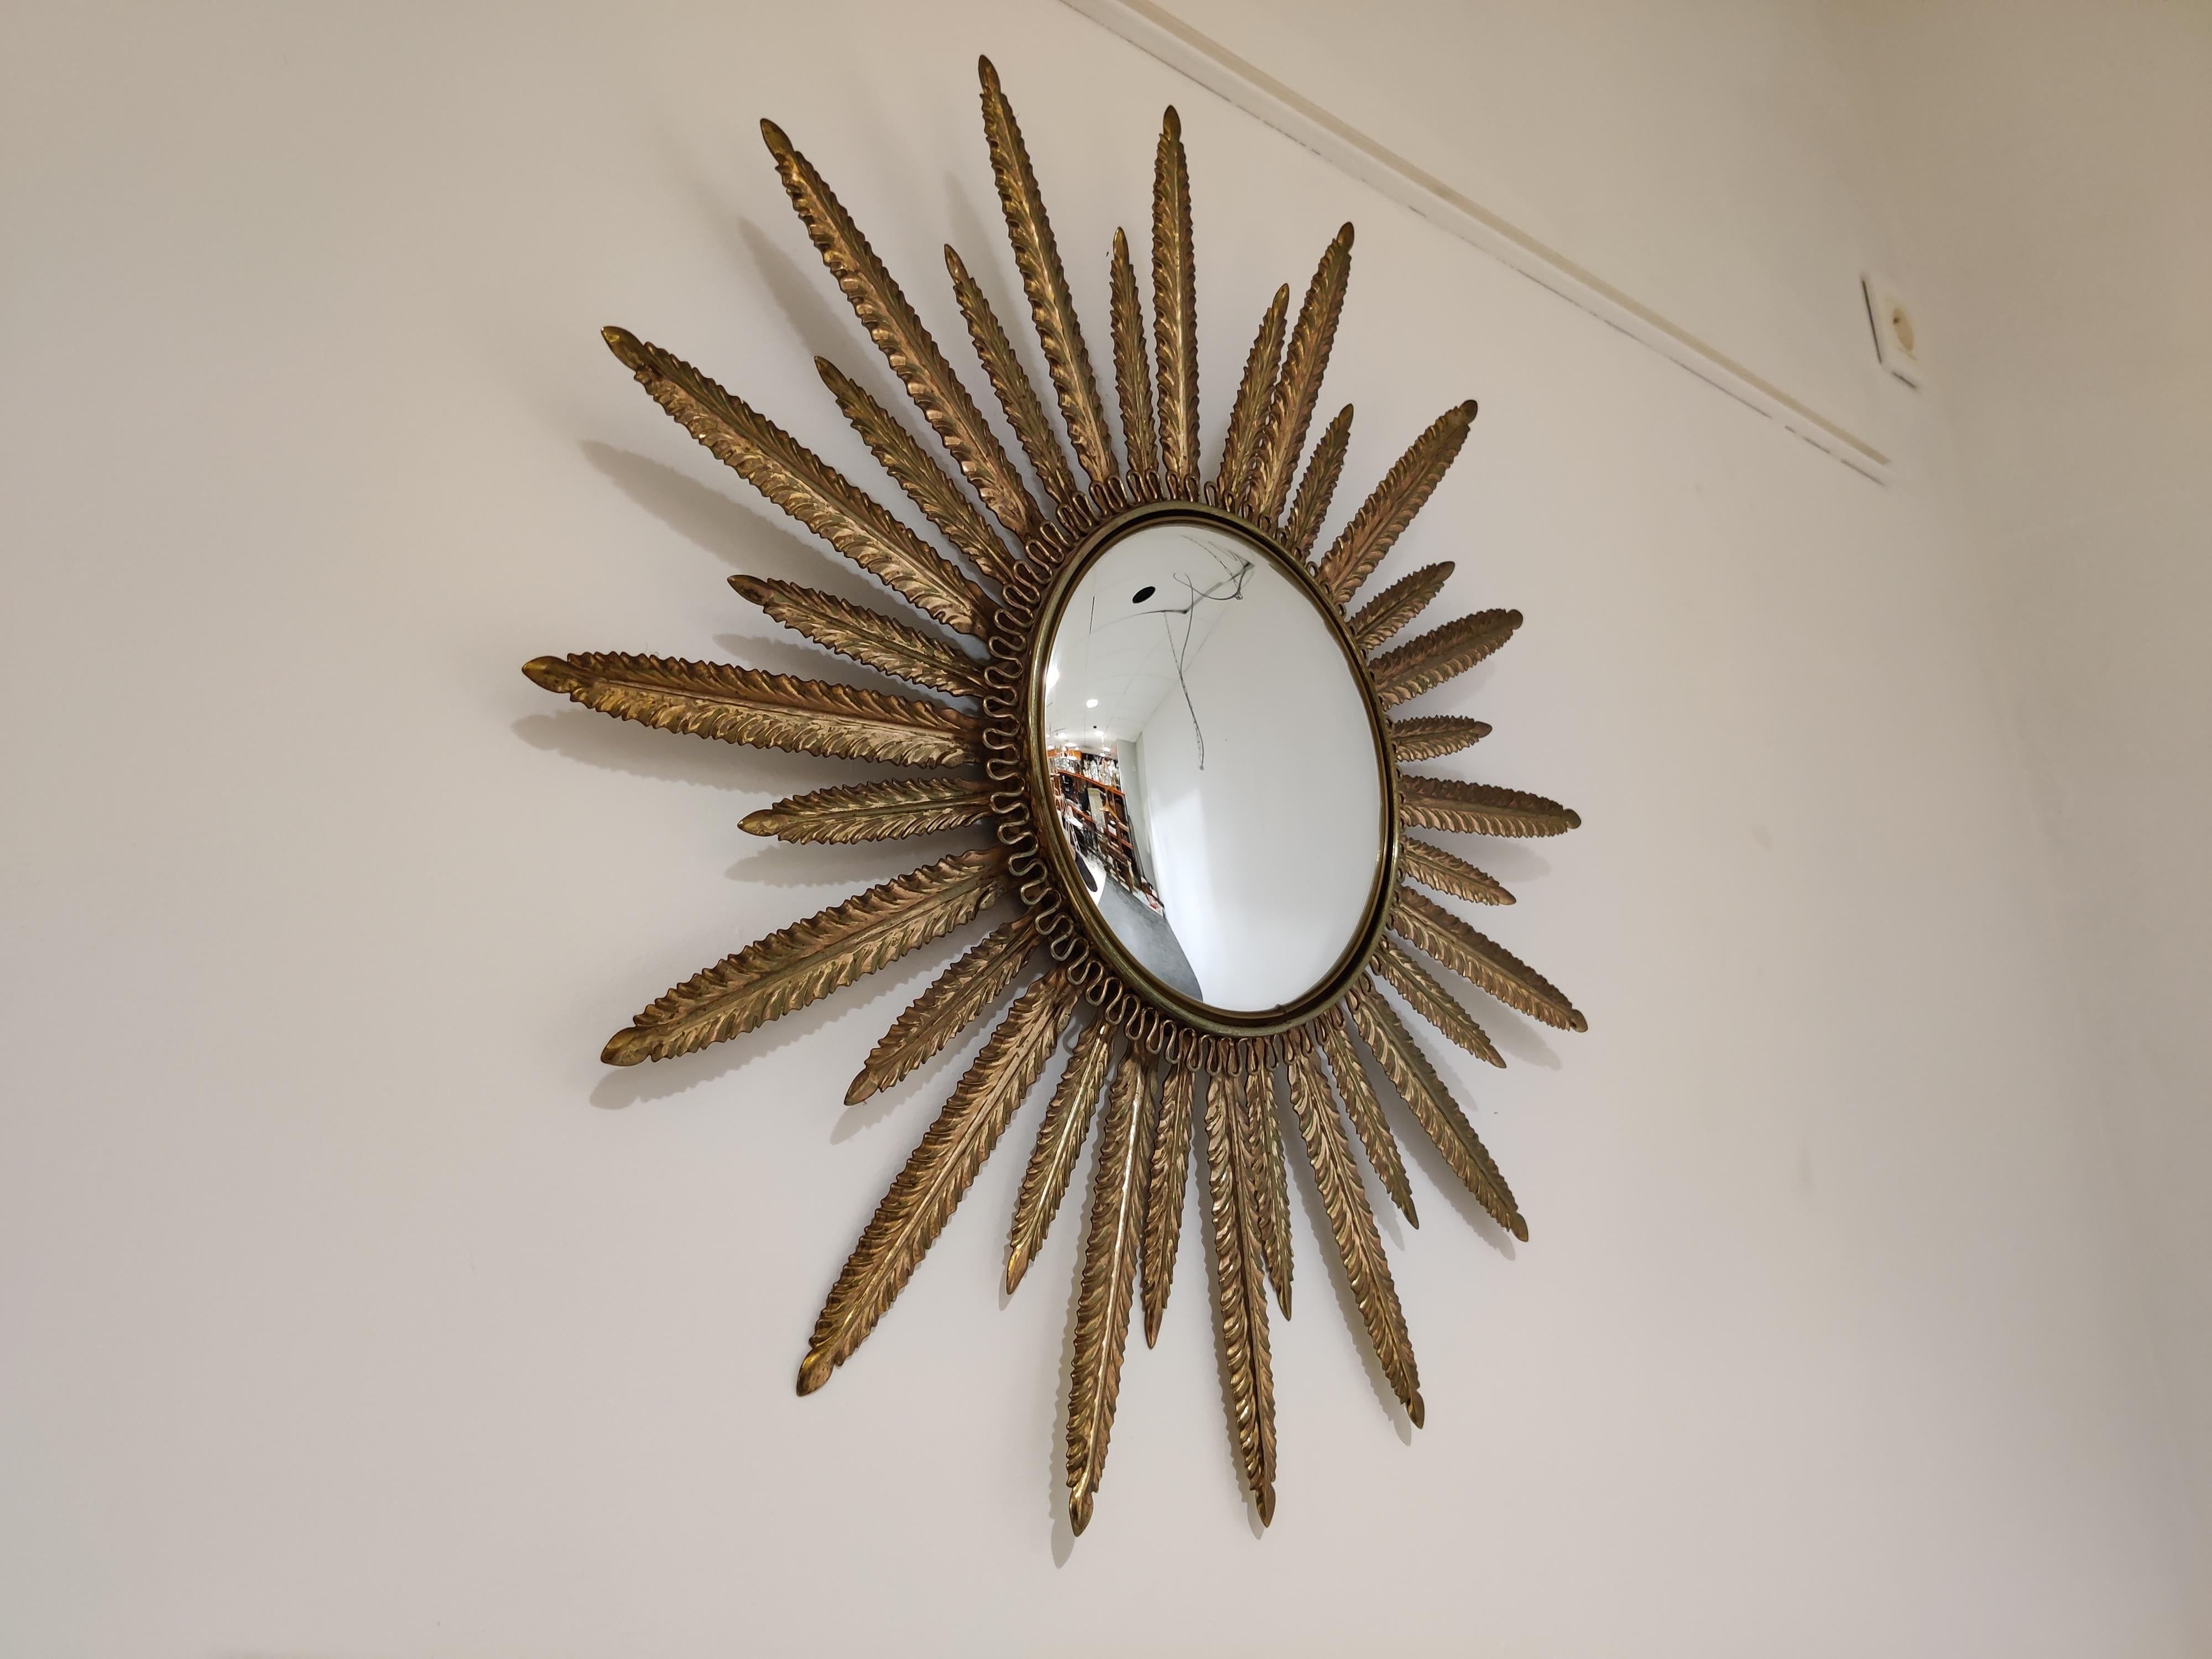 Midcentury brass sunburst or flower mirror with convex glass.

This mirror fits in most interiors and is a perfect add-on for a Regency style interior.

The mirror is made from patinated brass.

Good condition.

France - 1960s

Measures: